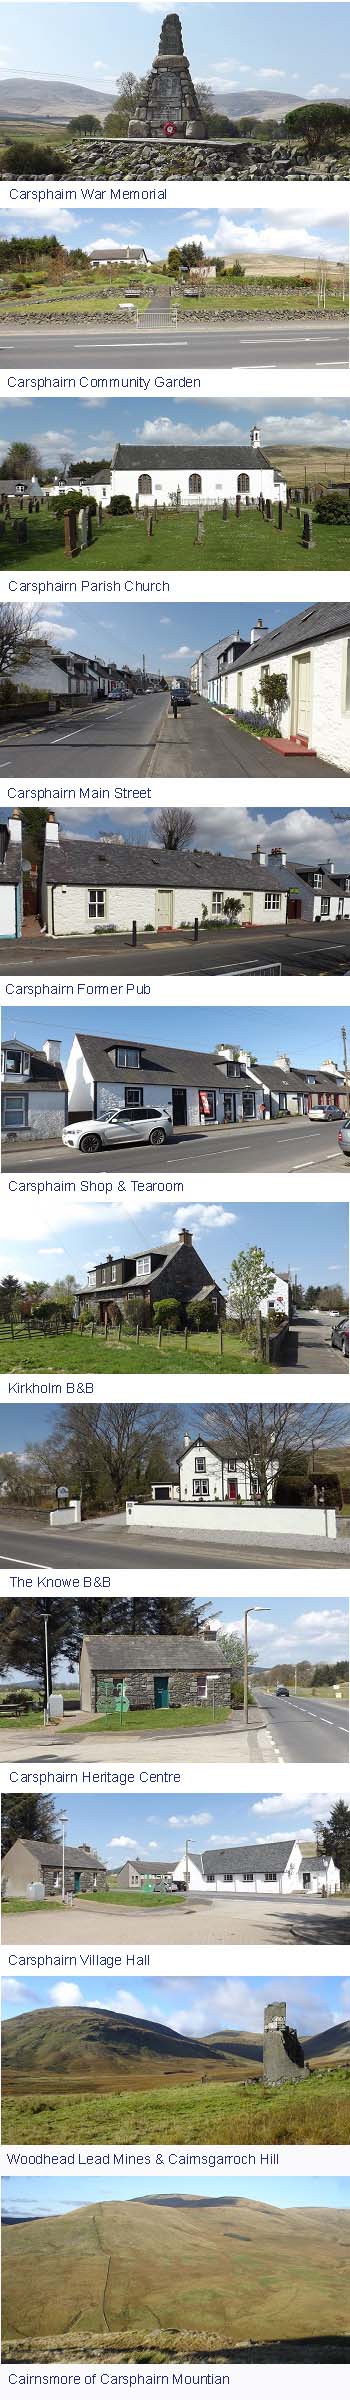 Carsphairn Images